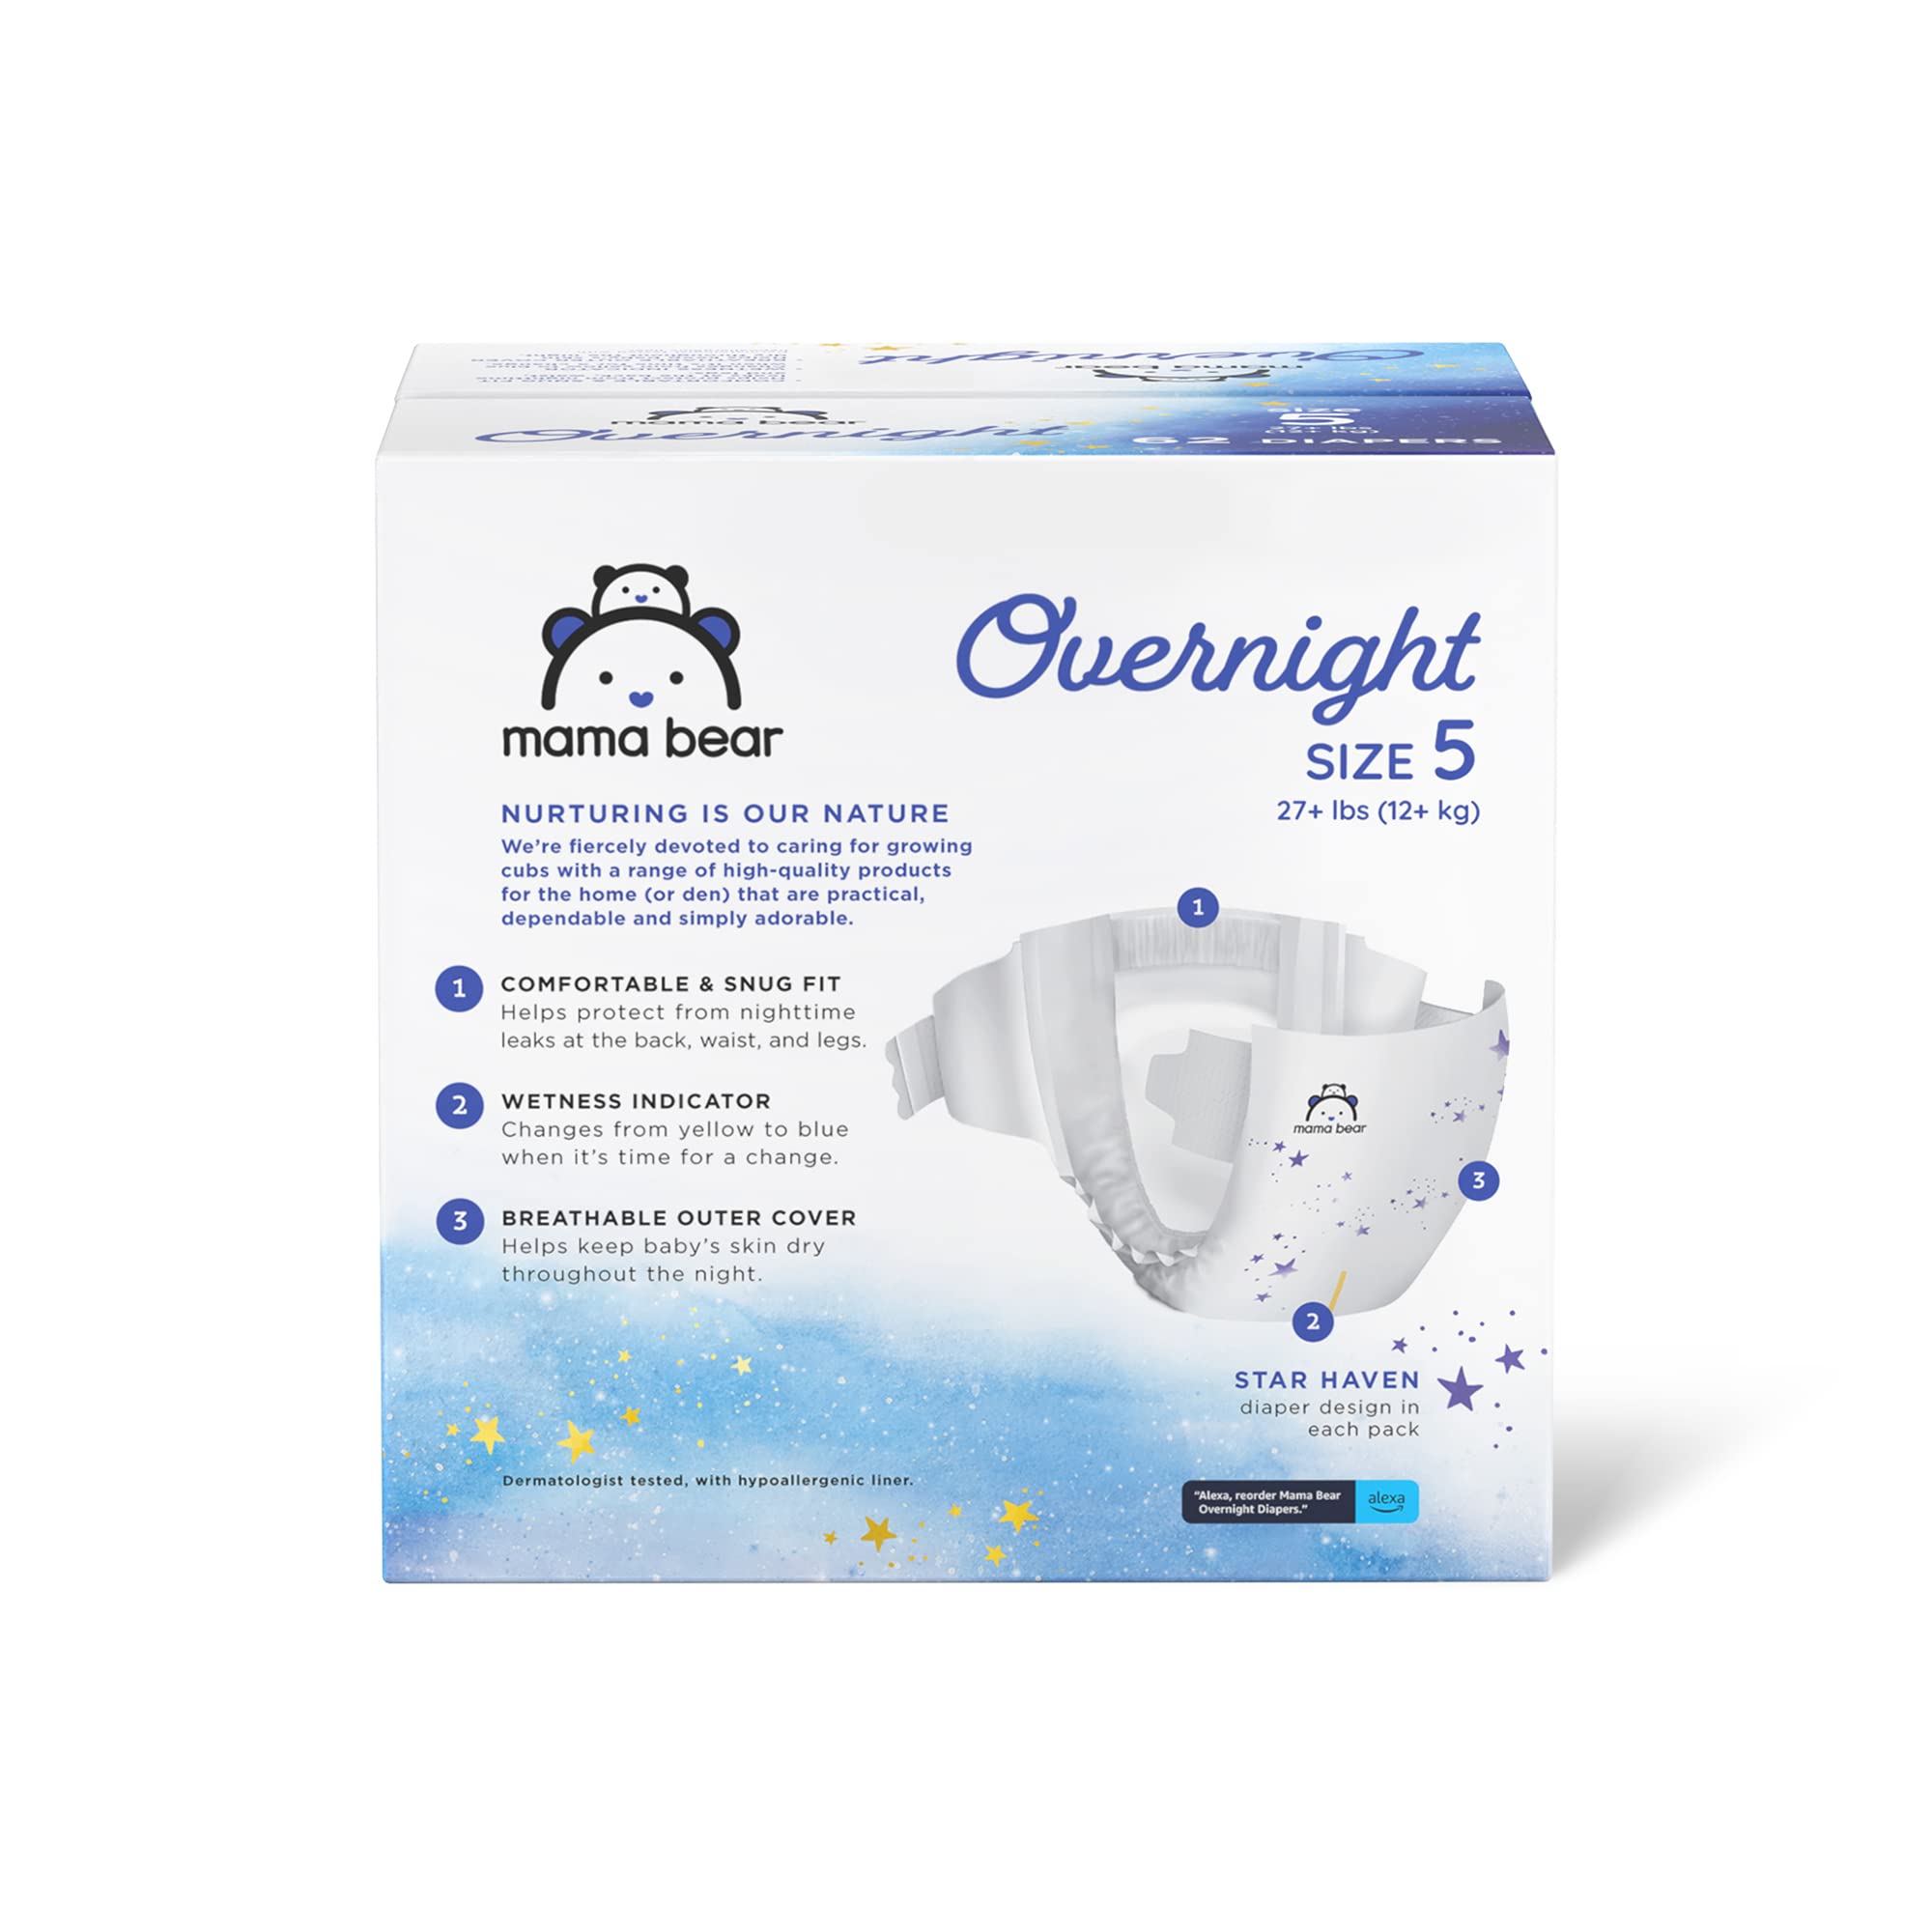 Amazon Brand - Mama Bear Overnight Diapers, Hypoallergenic, Size 5 (62 count)